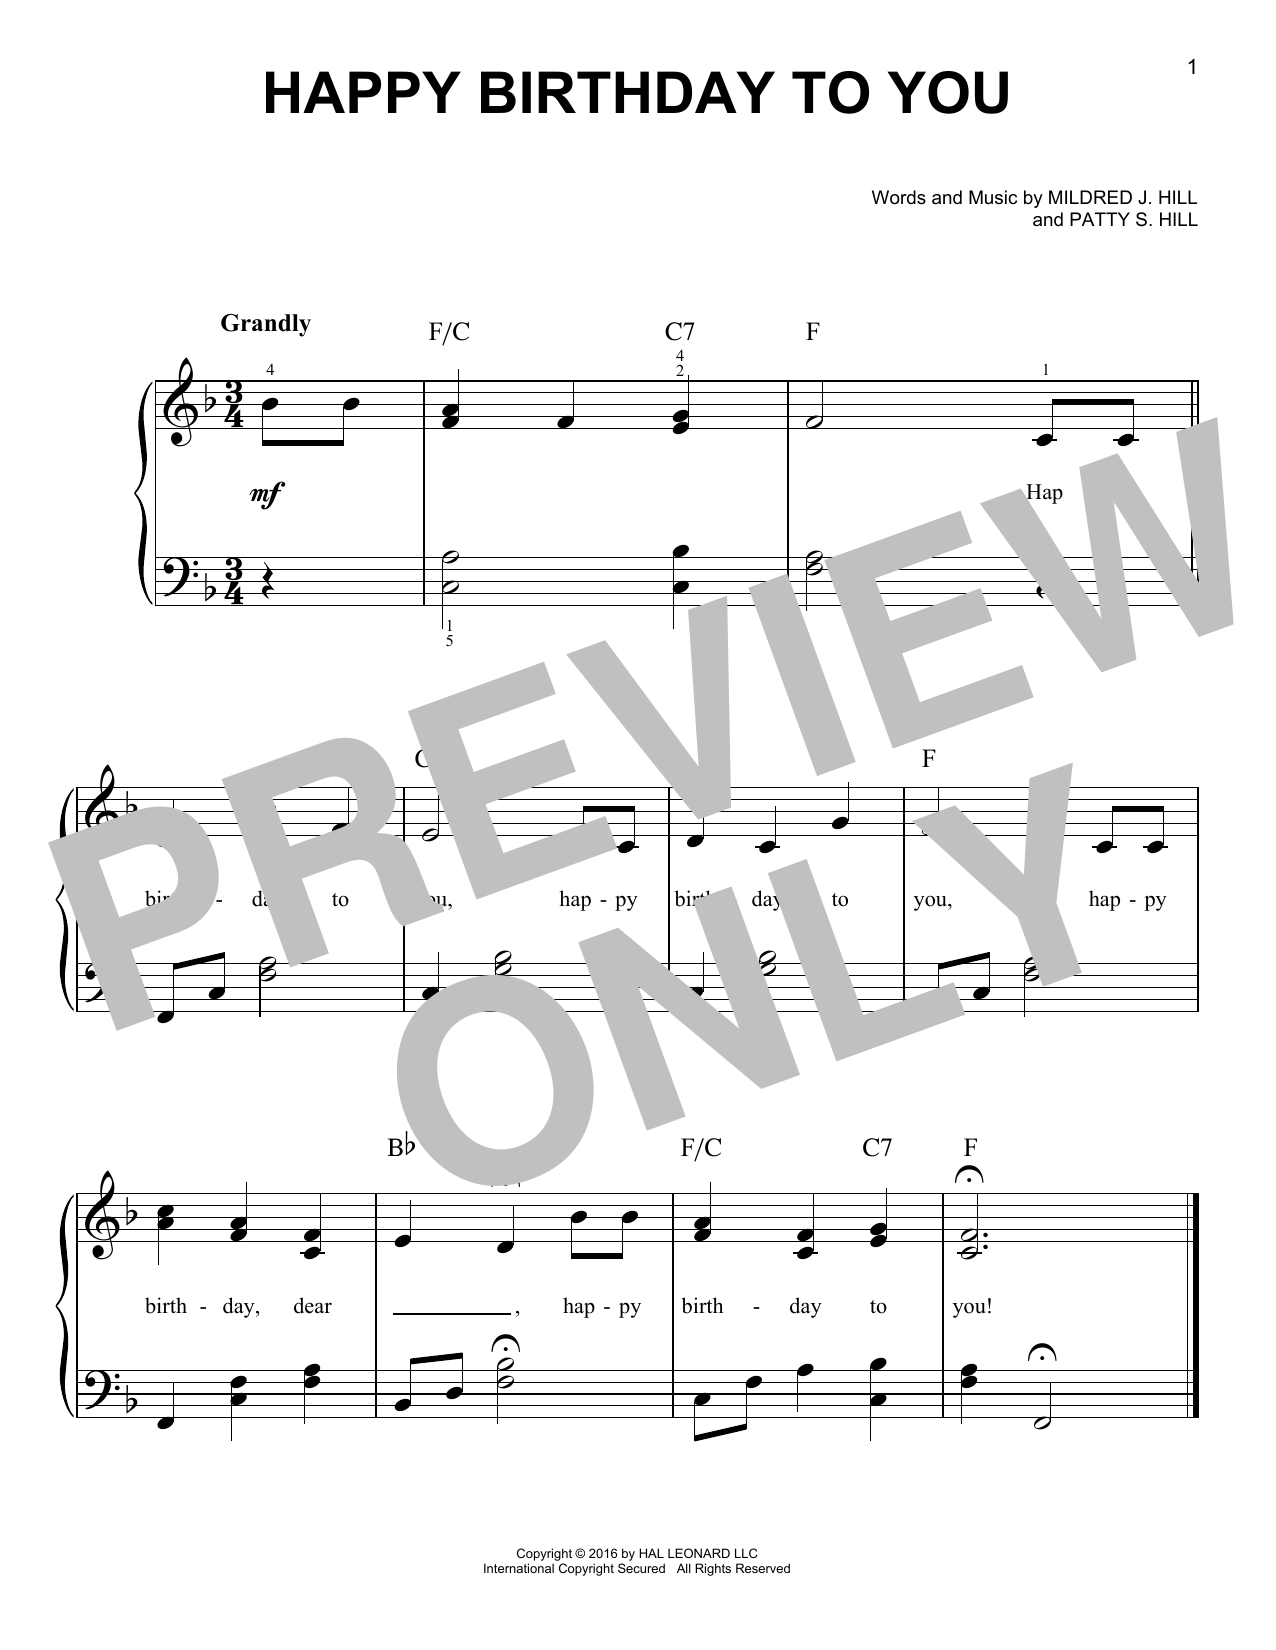 Download Mildred J. Hill Happy Birthday To You Sheet Music